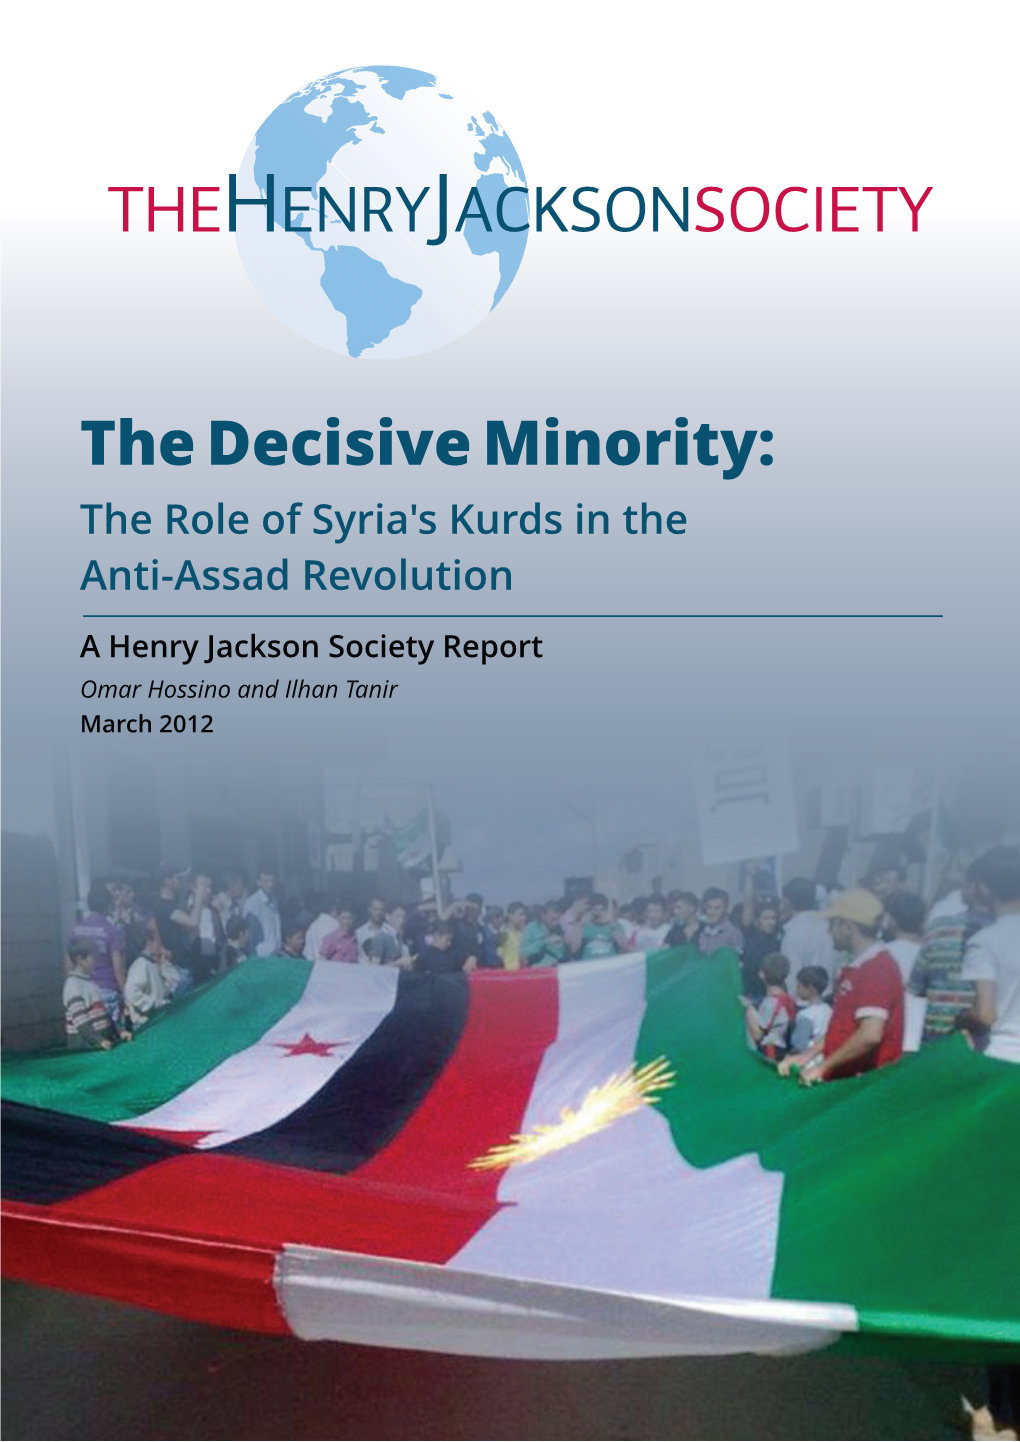 The Decisive Minority: the Role of Syria's Kurds in the Anti-Assad Revolution